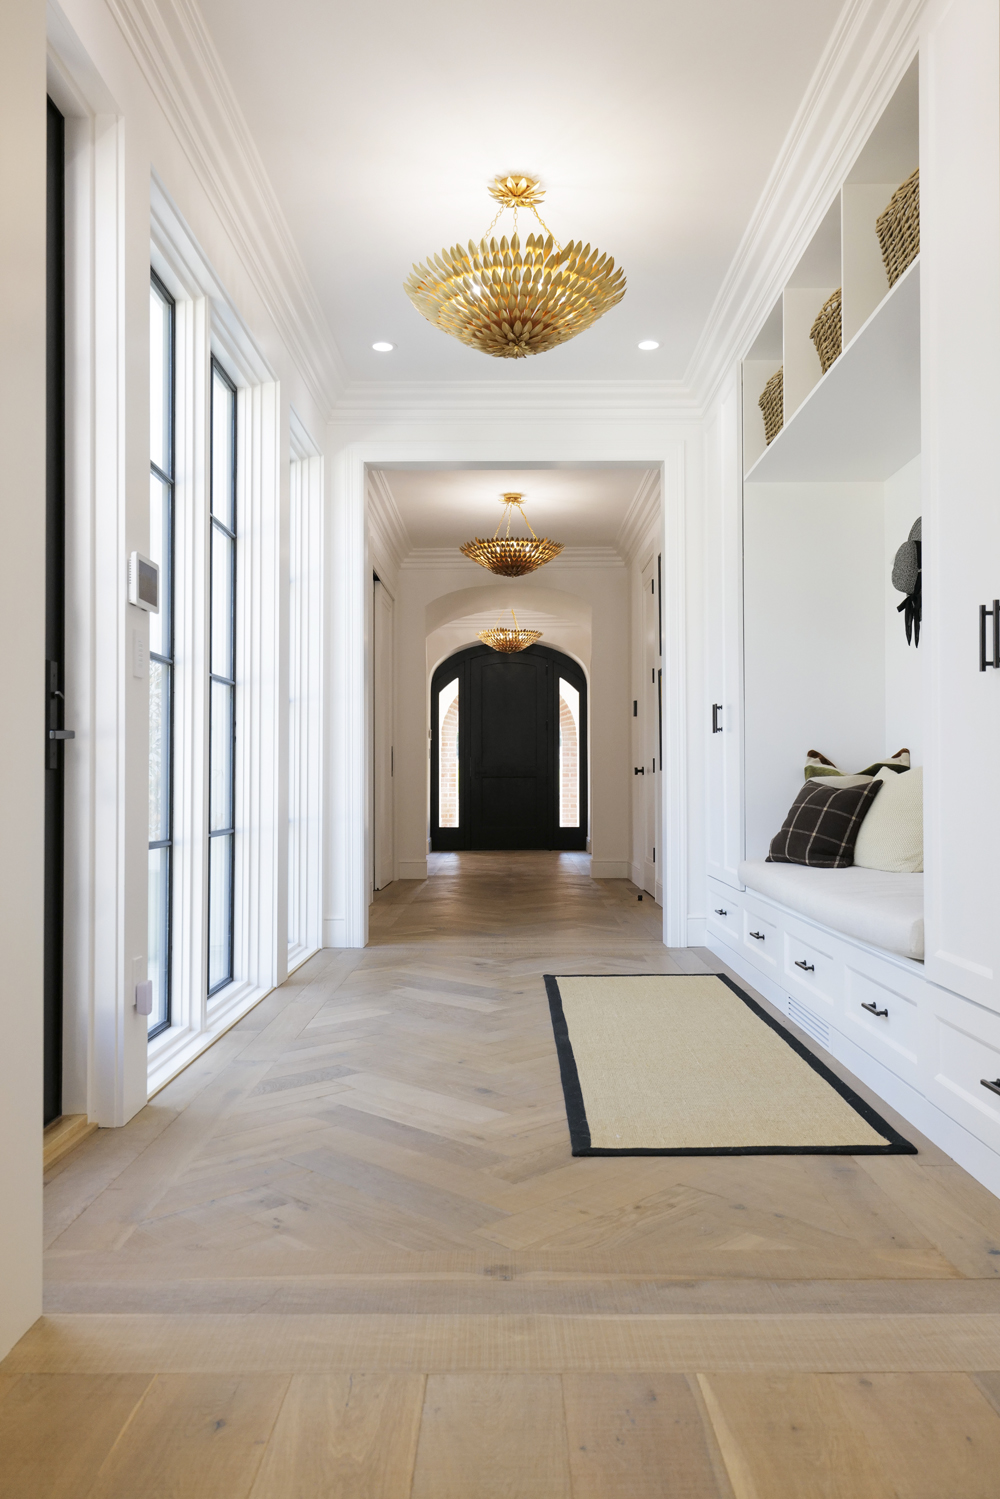 The bright whites and dark accents are the perfect combo for this expansive hallway that comes complete with its own mudroom-meets-cubby nook